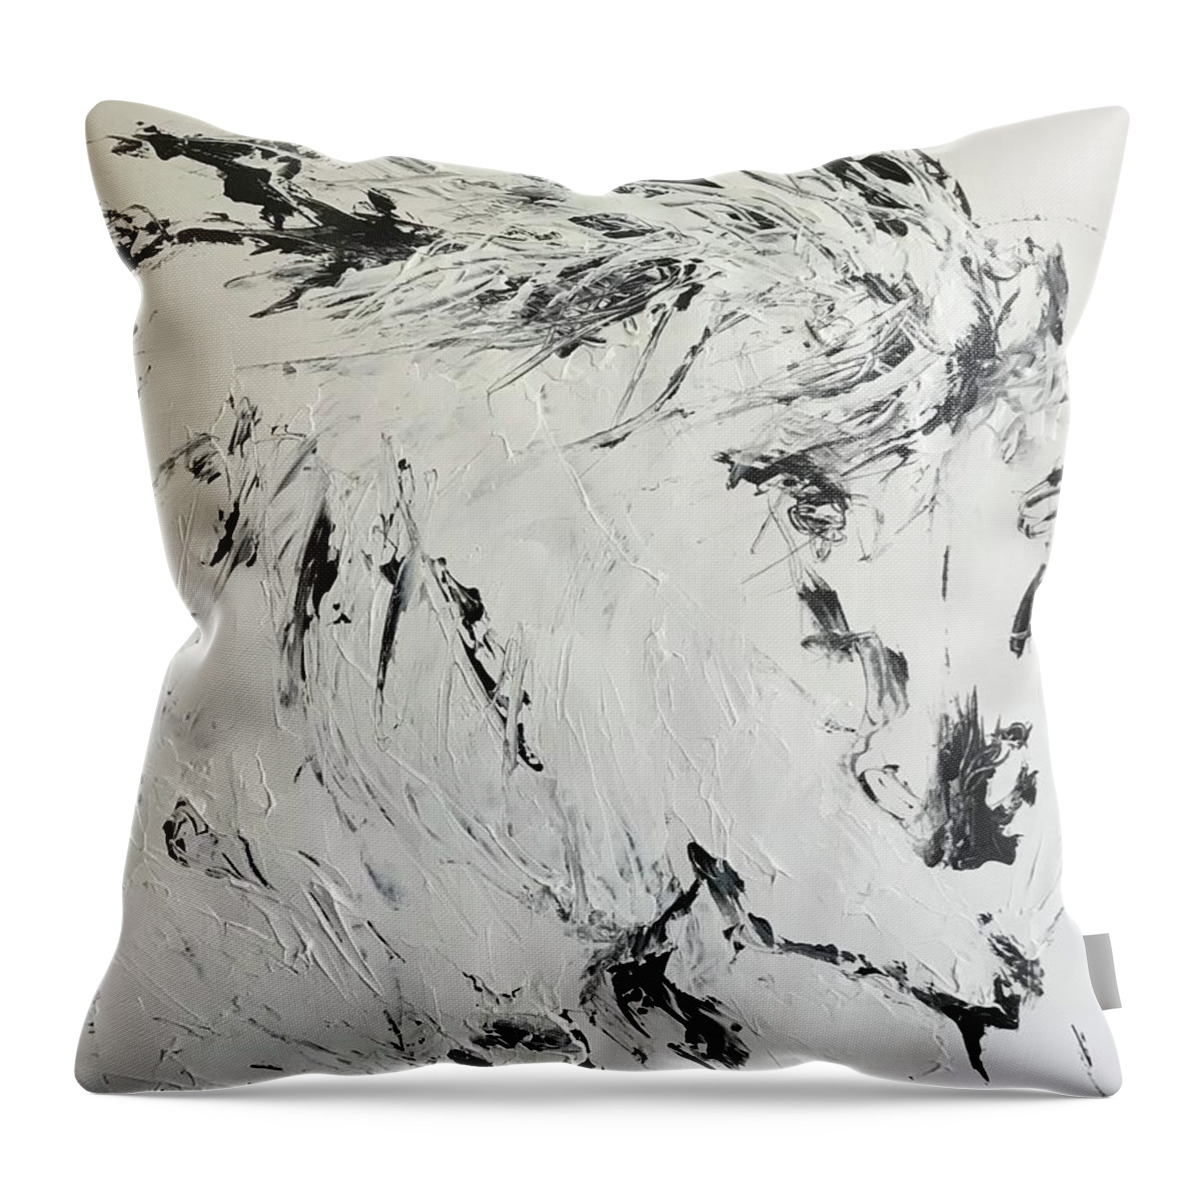 Horse Throw Pillow featuring the painting Flat Our by Elizabeth Parashis